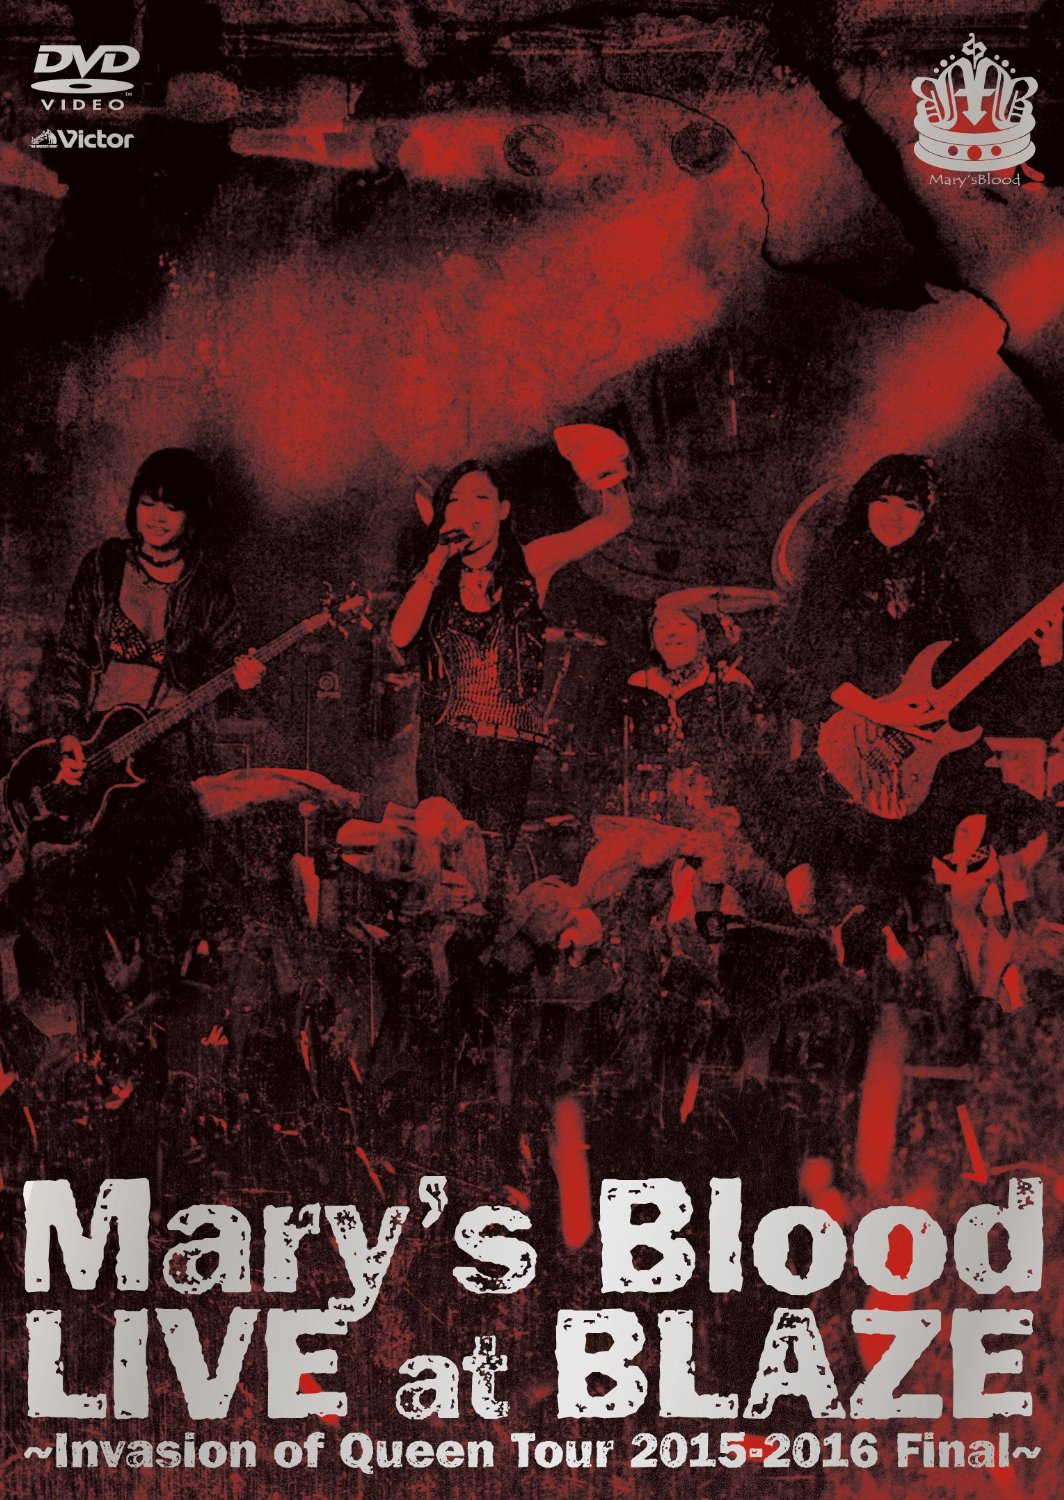 Mary's Blood ( メアリーズブラッド )  の DVD LIVE at BLAZE ～Invasion of Queen Tour 2015-2016 Final～